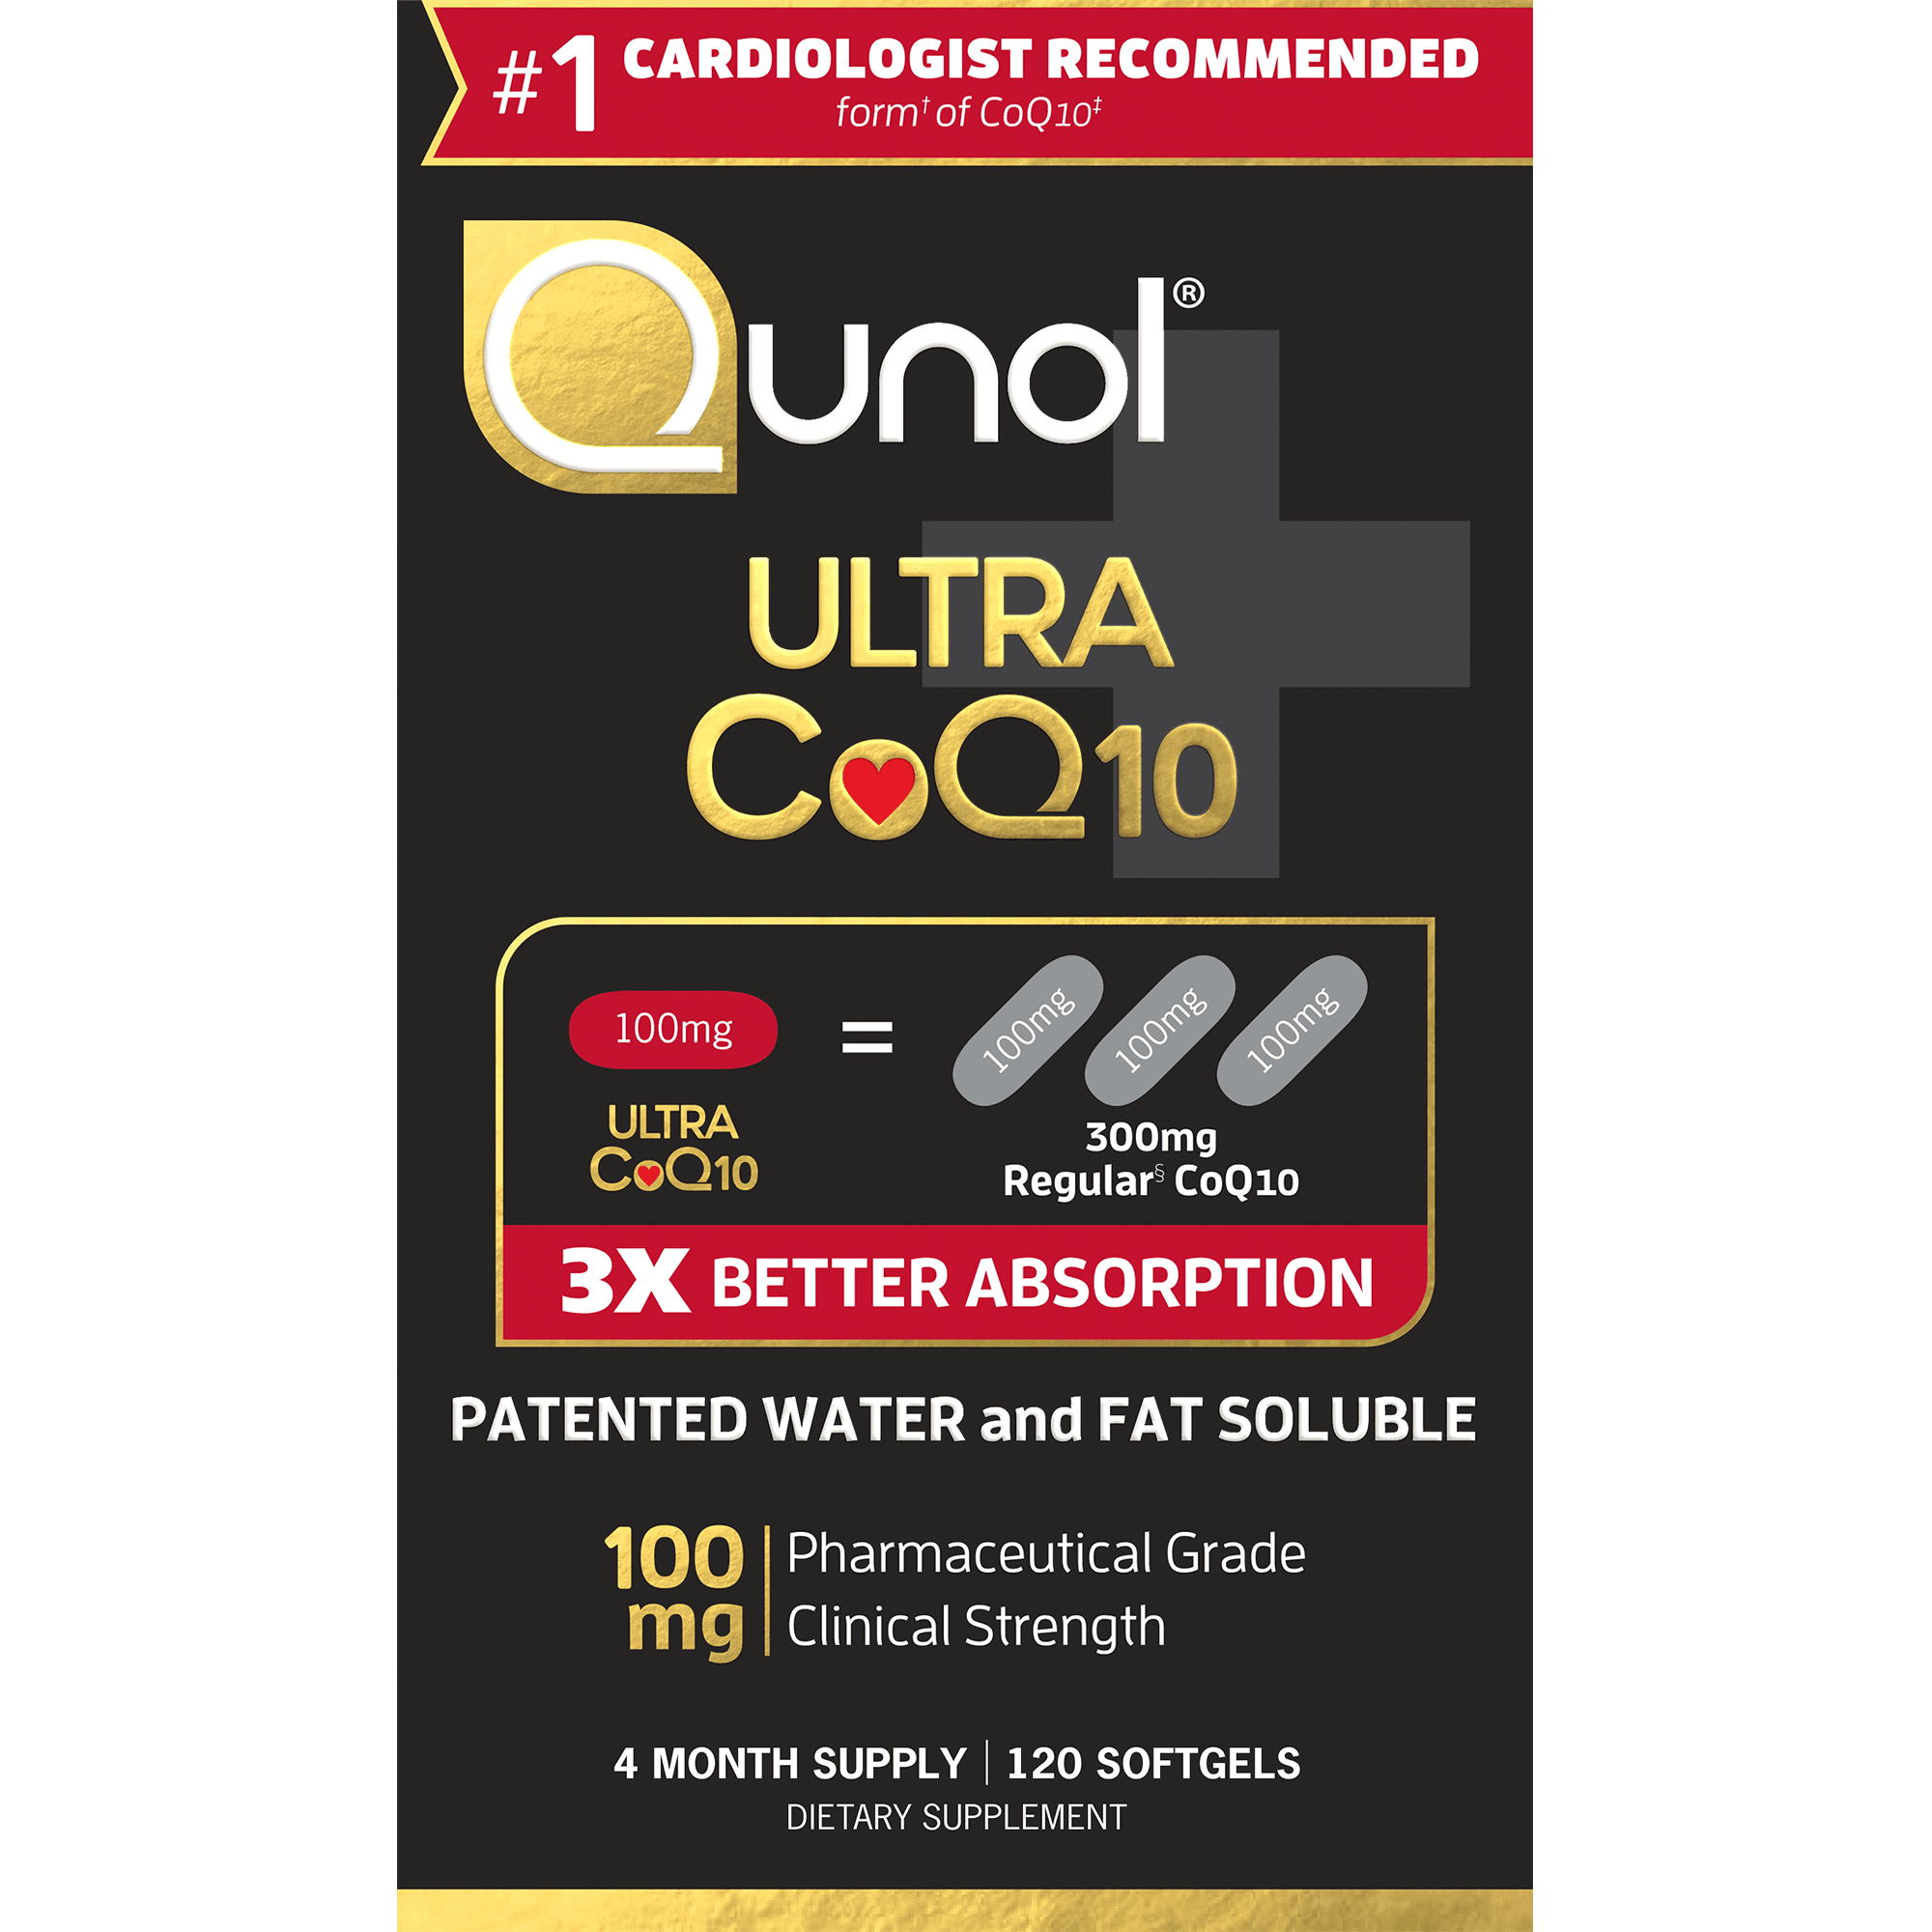 Qunol Ultra CoQ10 Softgels (120 Count) with 3x Better Absorption, Antioxidant for Heart Health, 100mg Natural Supplement Form of Coenzyme Q10